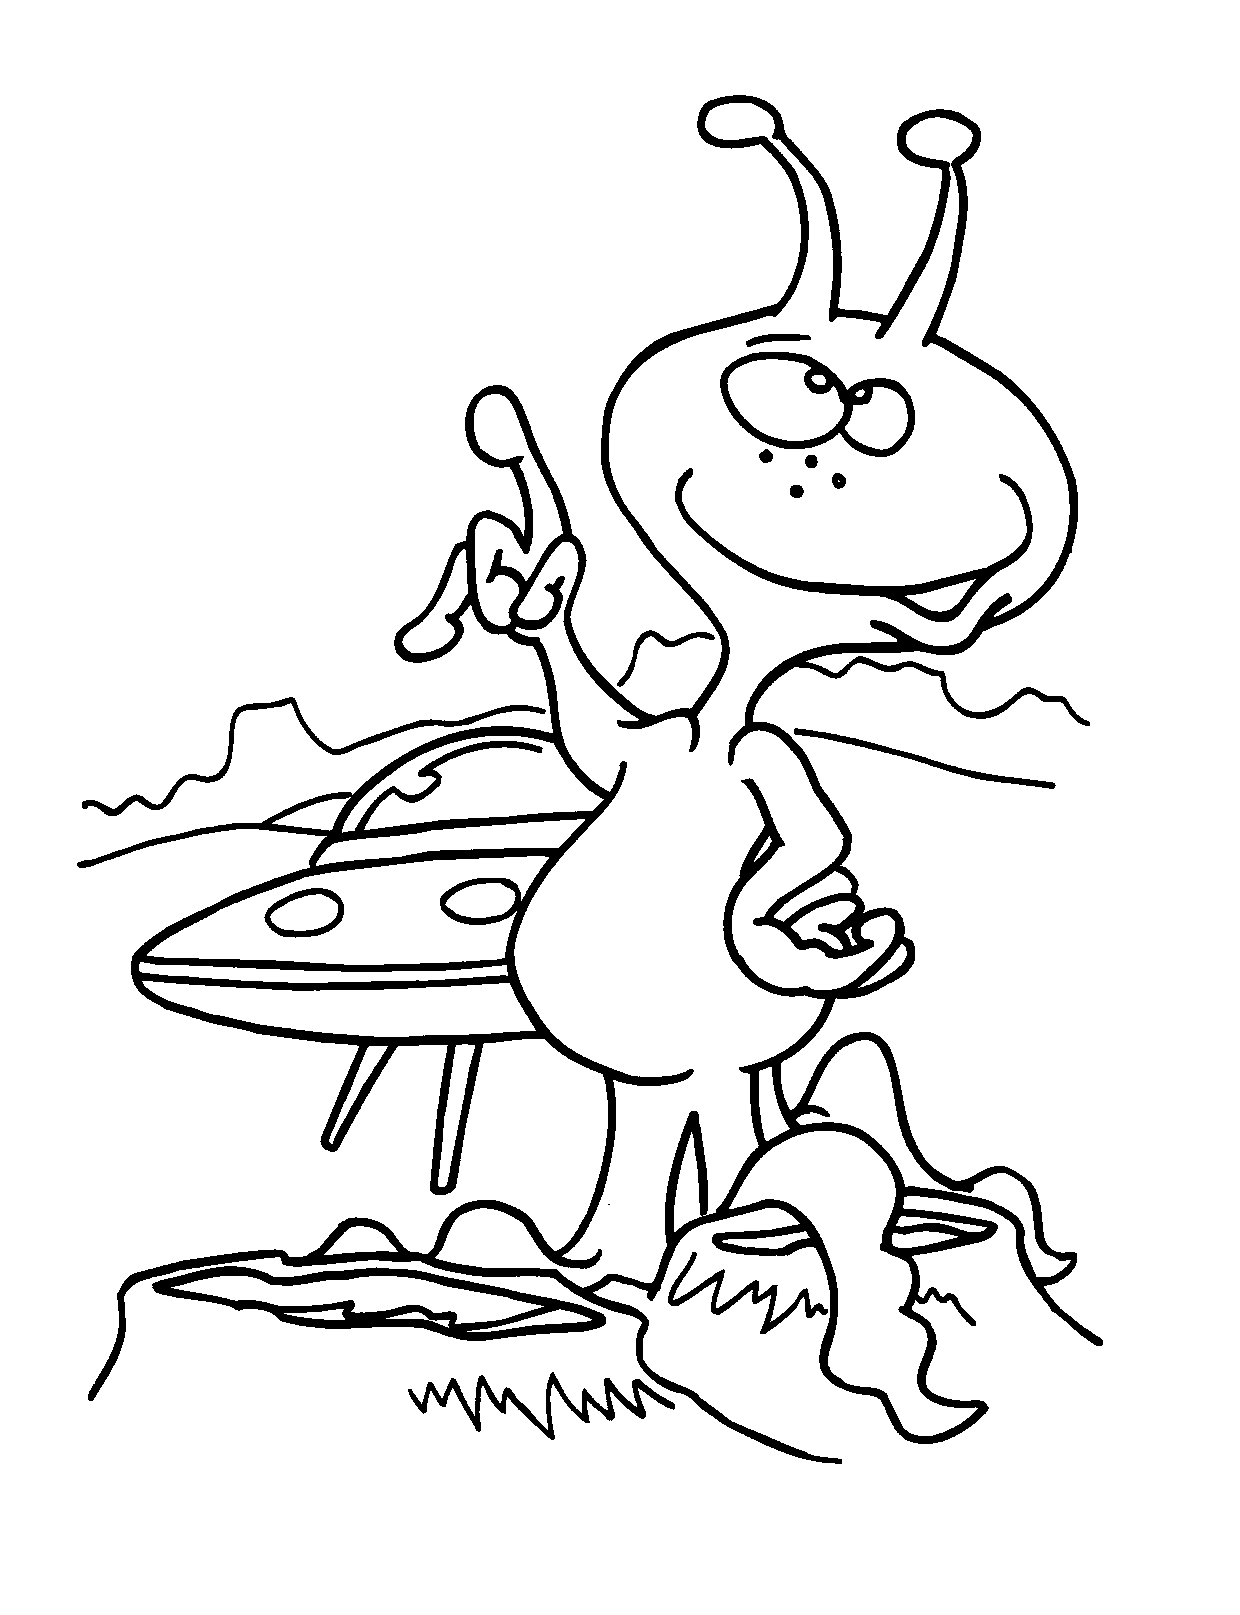 free-printable-spaceship-coloring-pages-for-kids